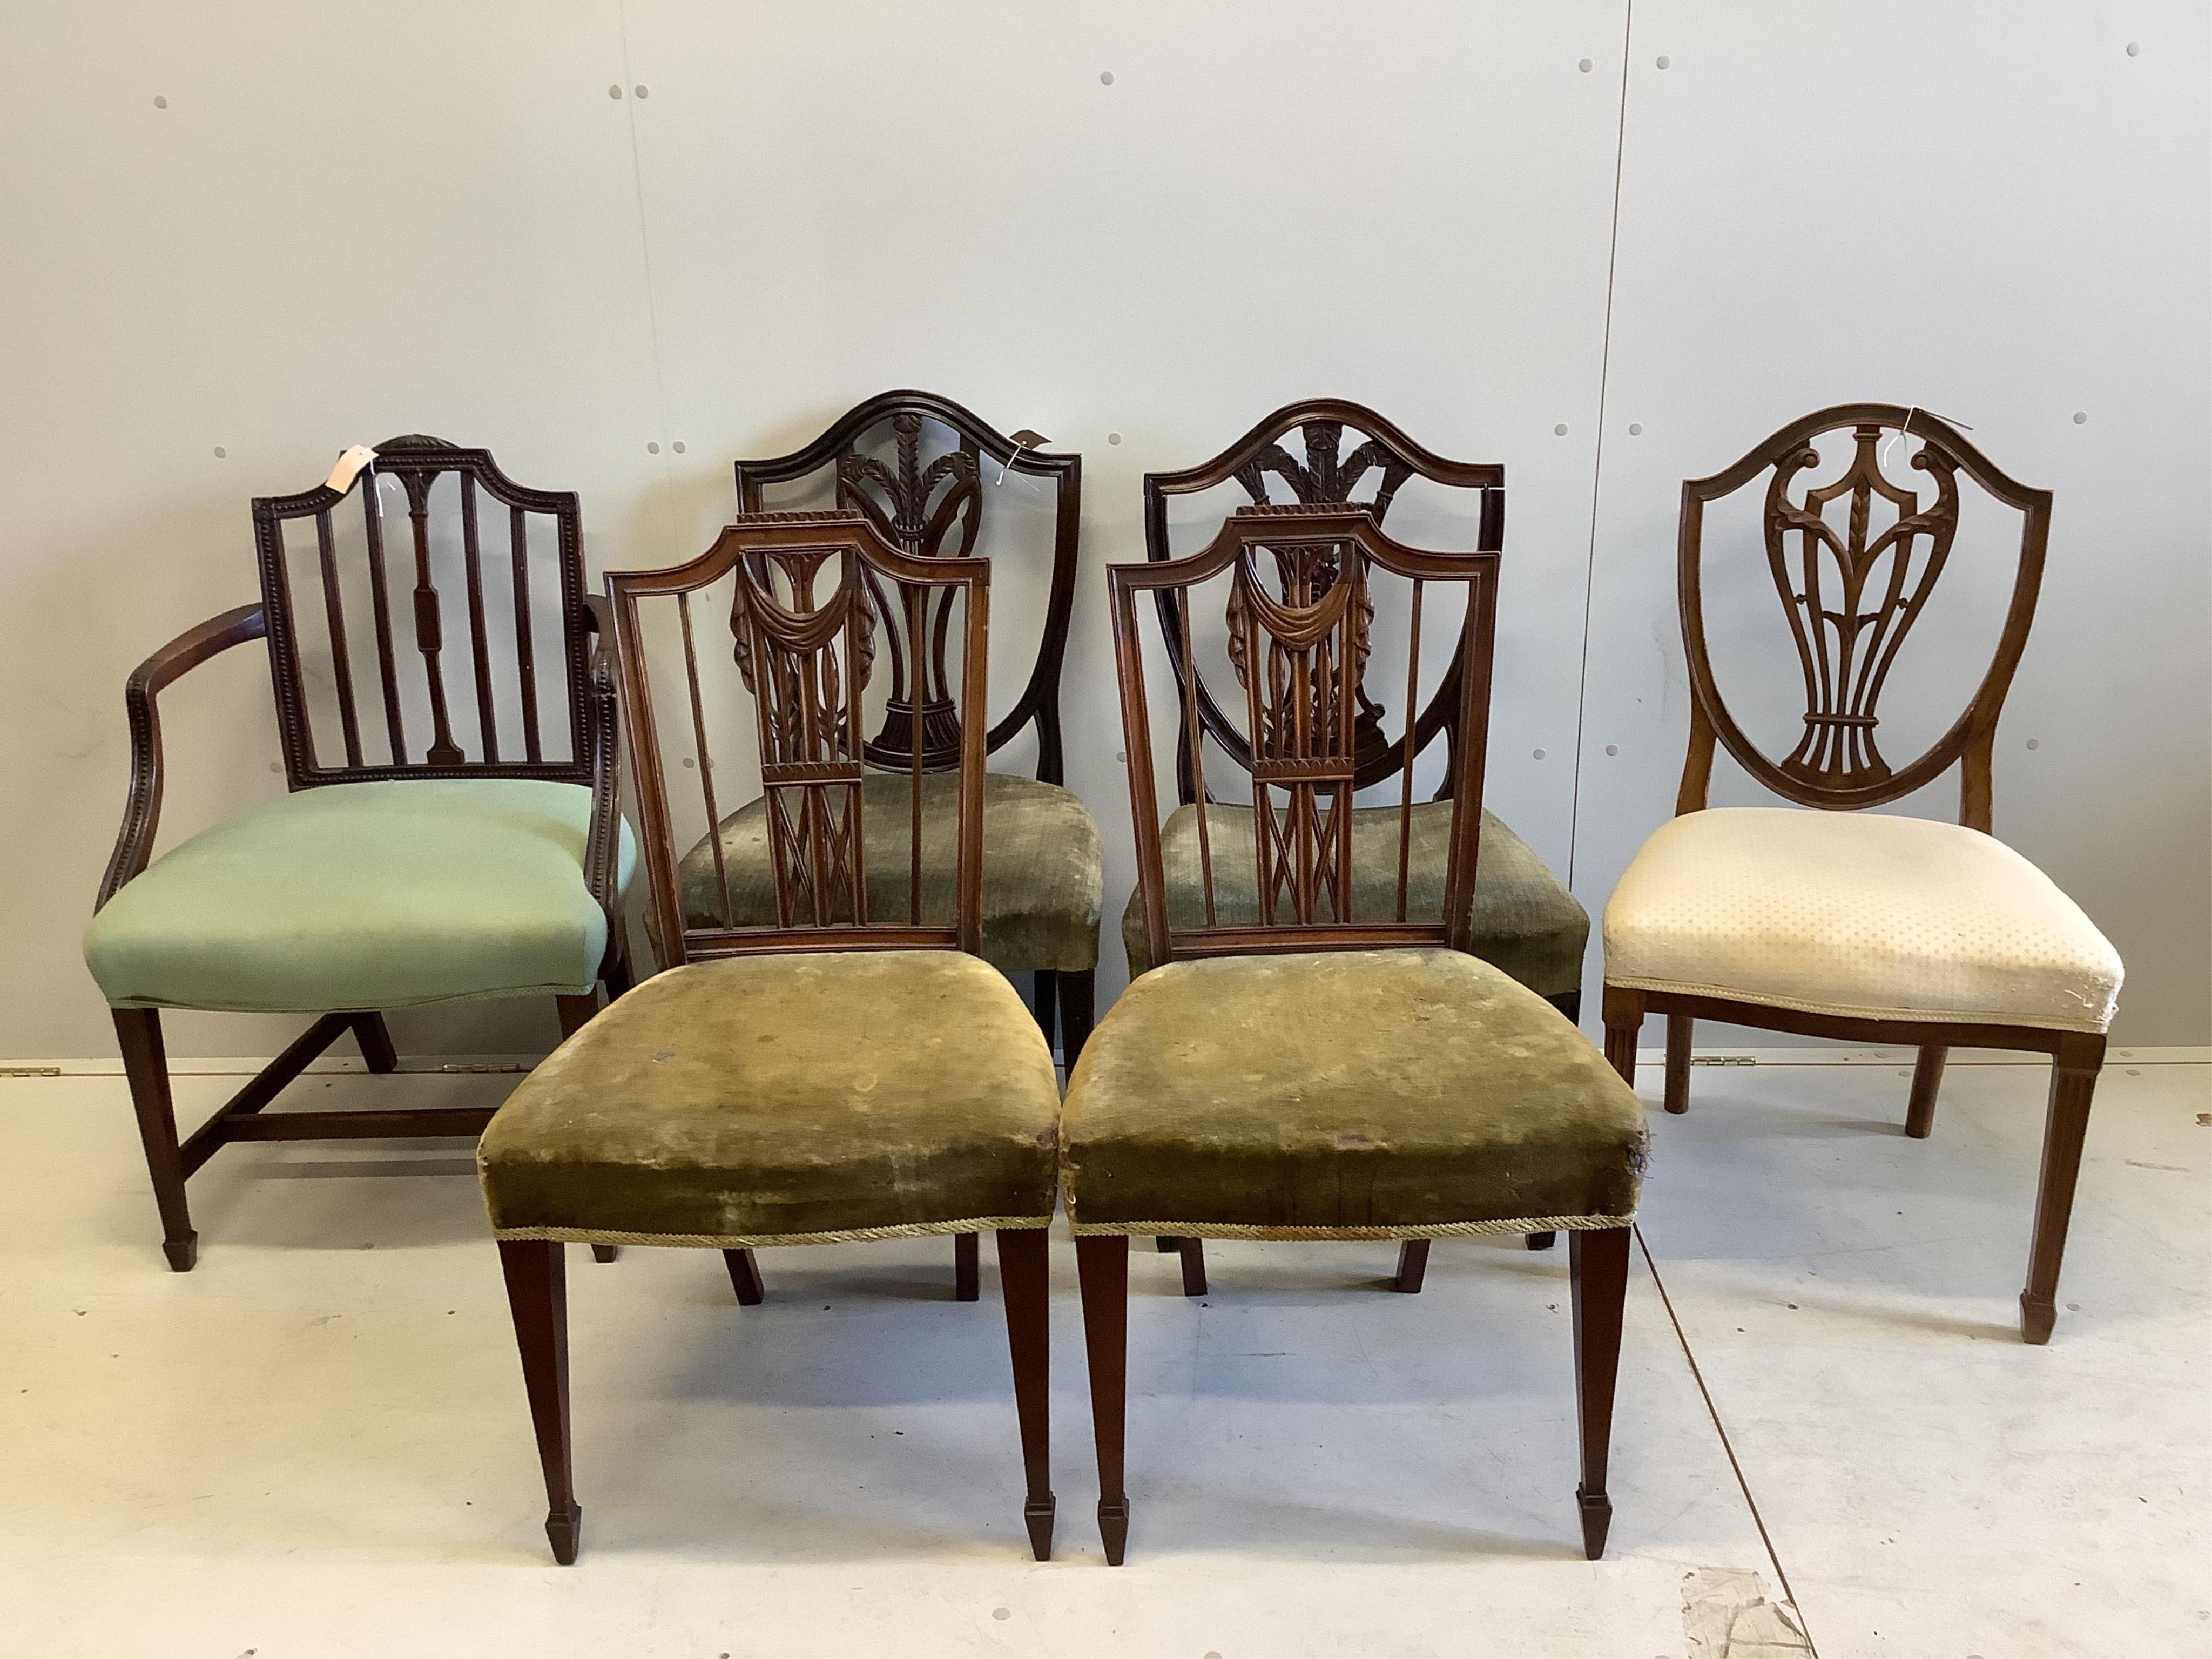 Two Hepplewhite period mahogany dining chairs, a 19th century Sheraton design elbow chair, a pair of side chairs and a further chair (6)                                                                                    